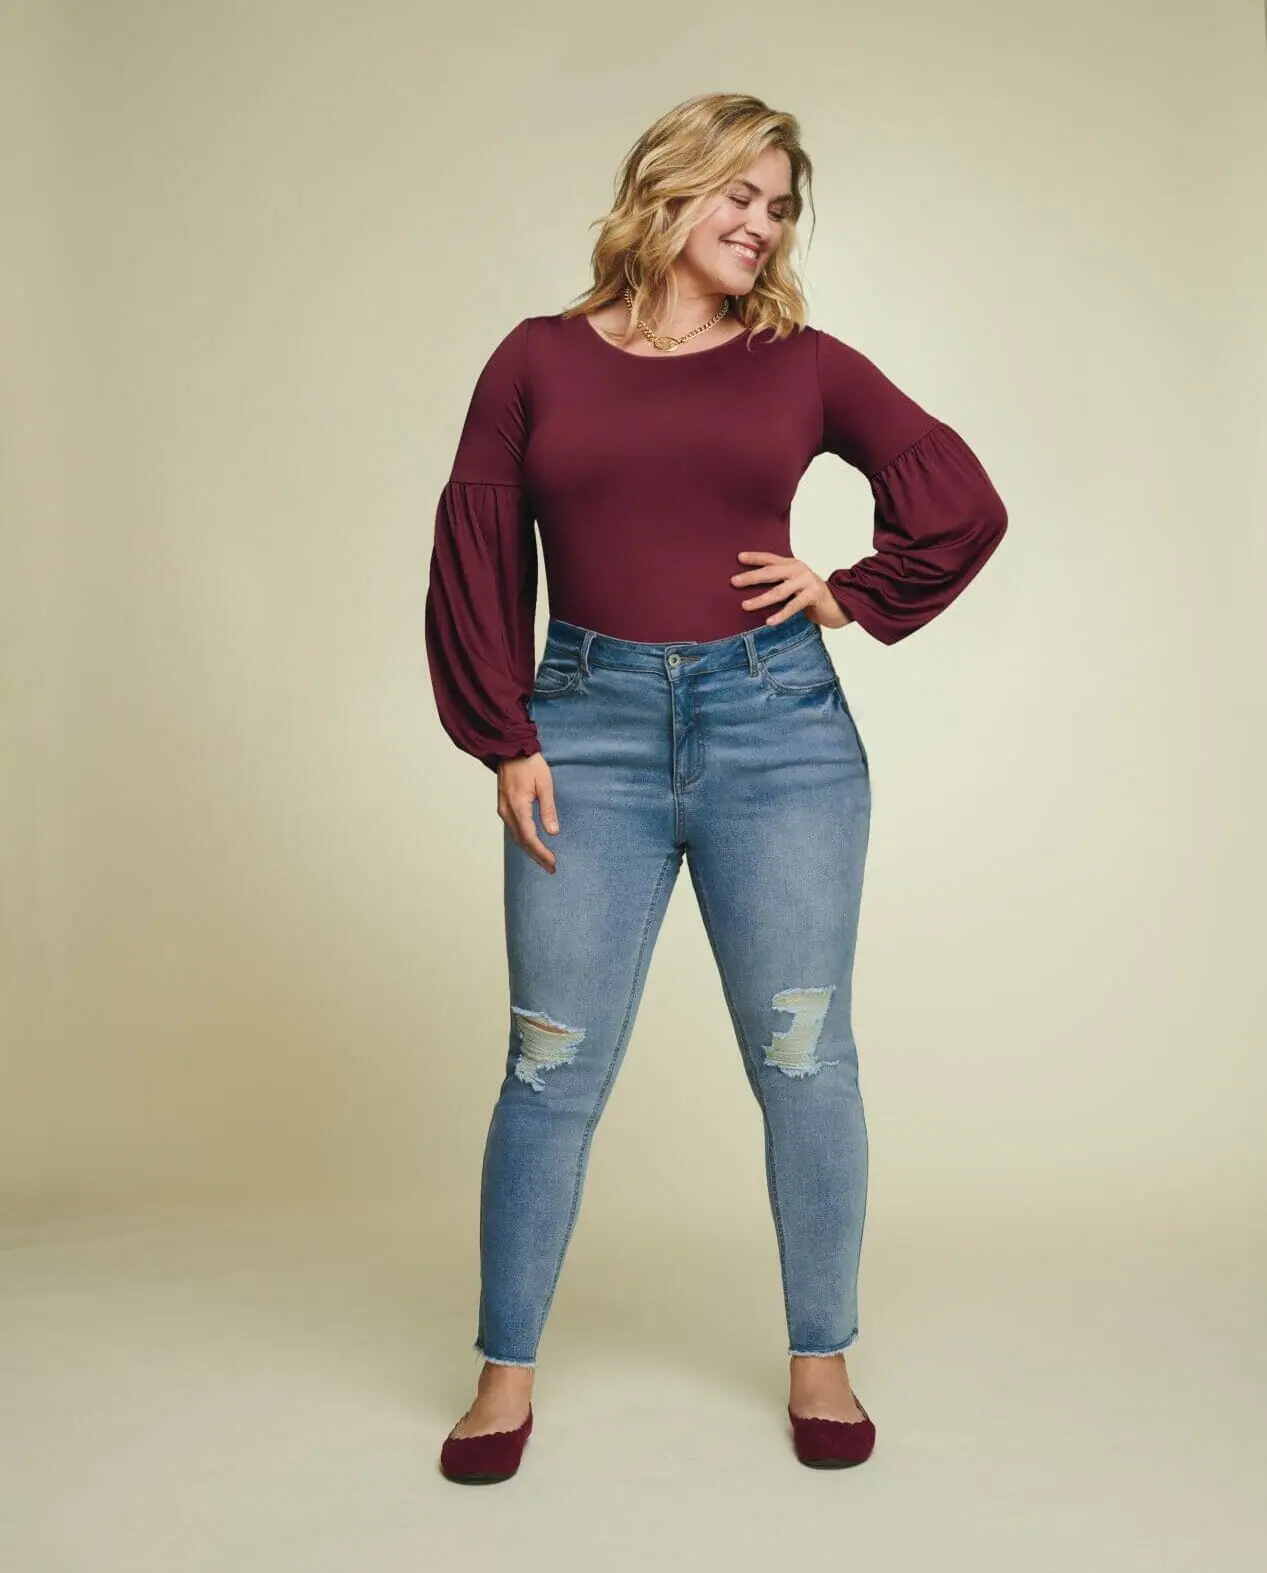 Flattering style tips for plus-size women